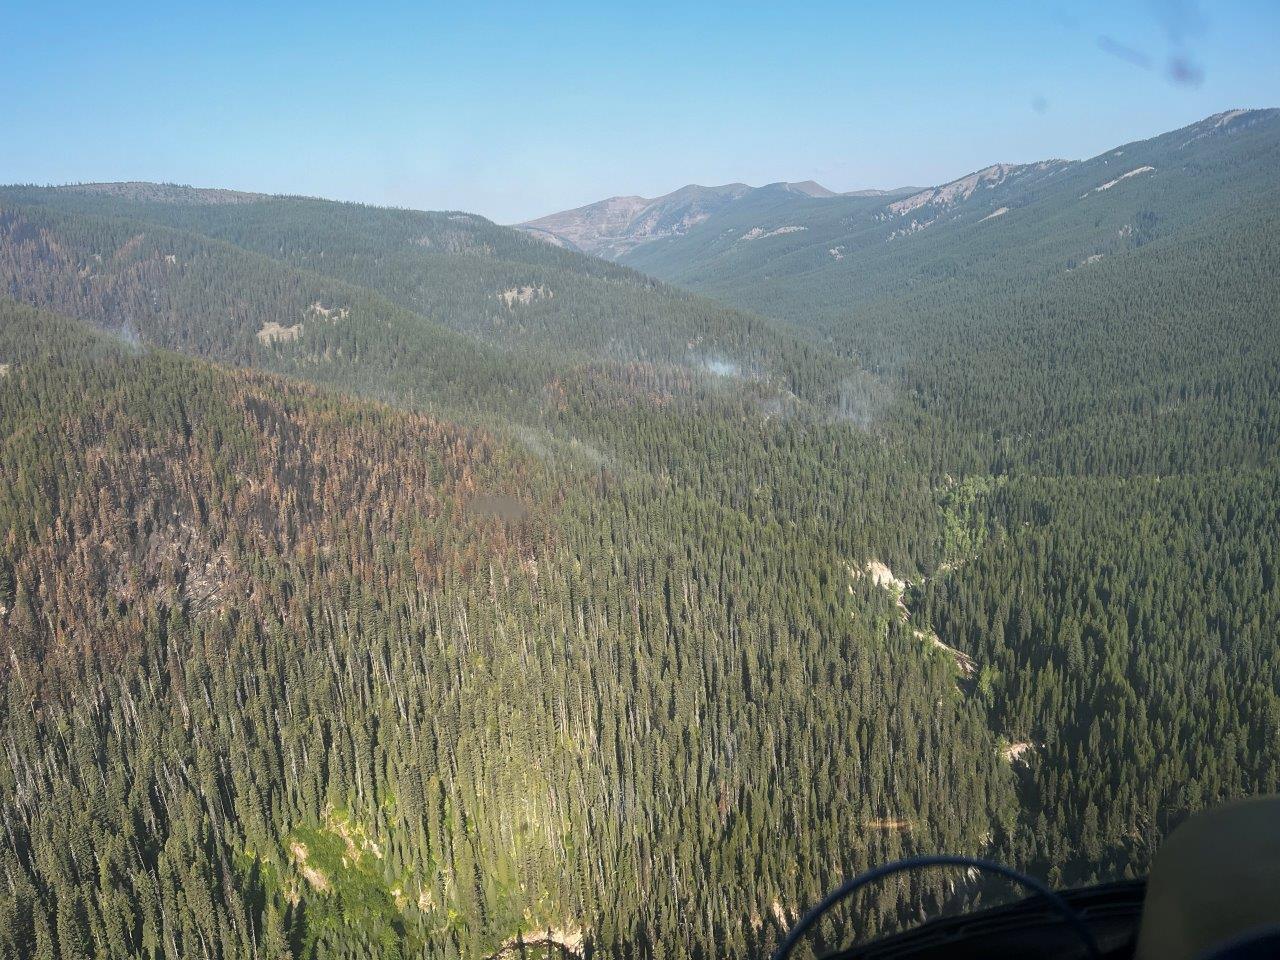 Incident Photo for the Dean Creek Fire